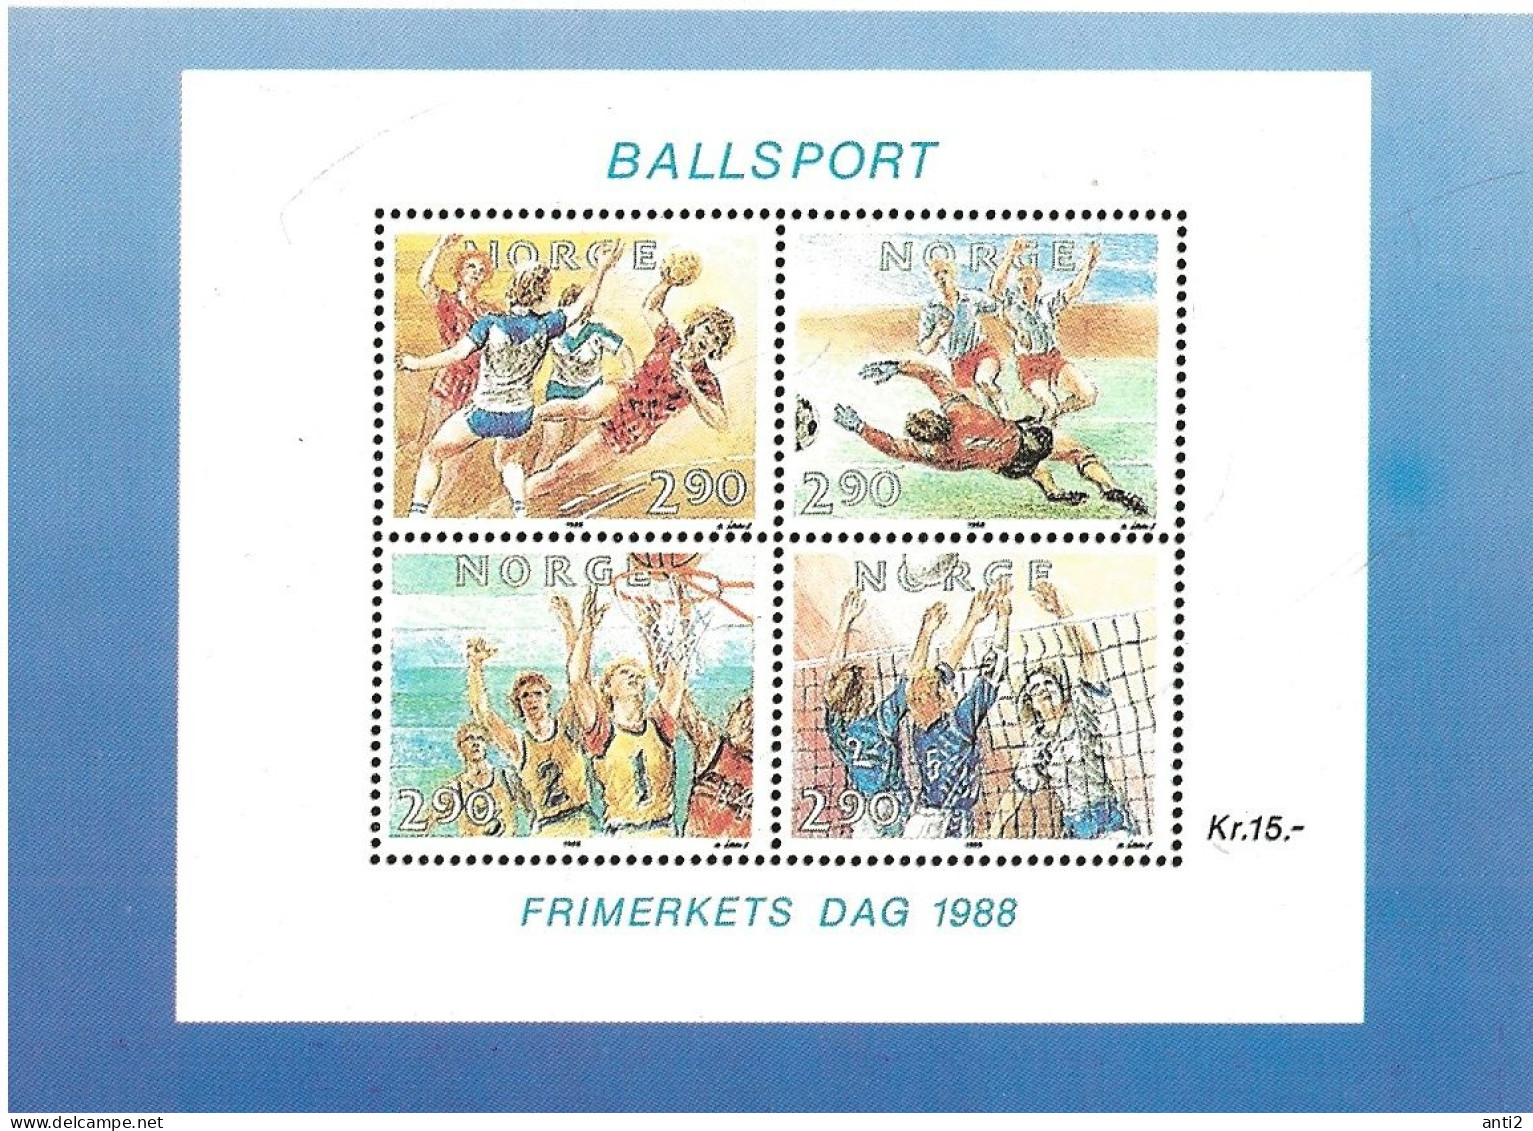 Norway 1988 Card With Imprinted Stamps Stamps Day  - Bloc Ballsports,  Maximum Card  Unused - Covers & Documents